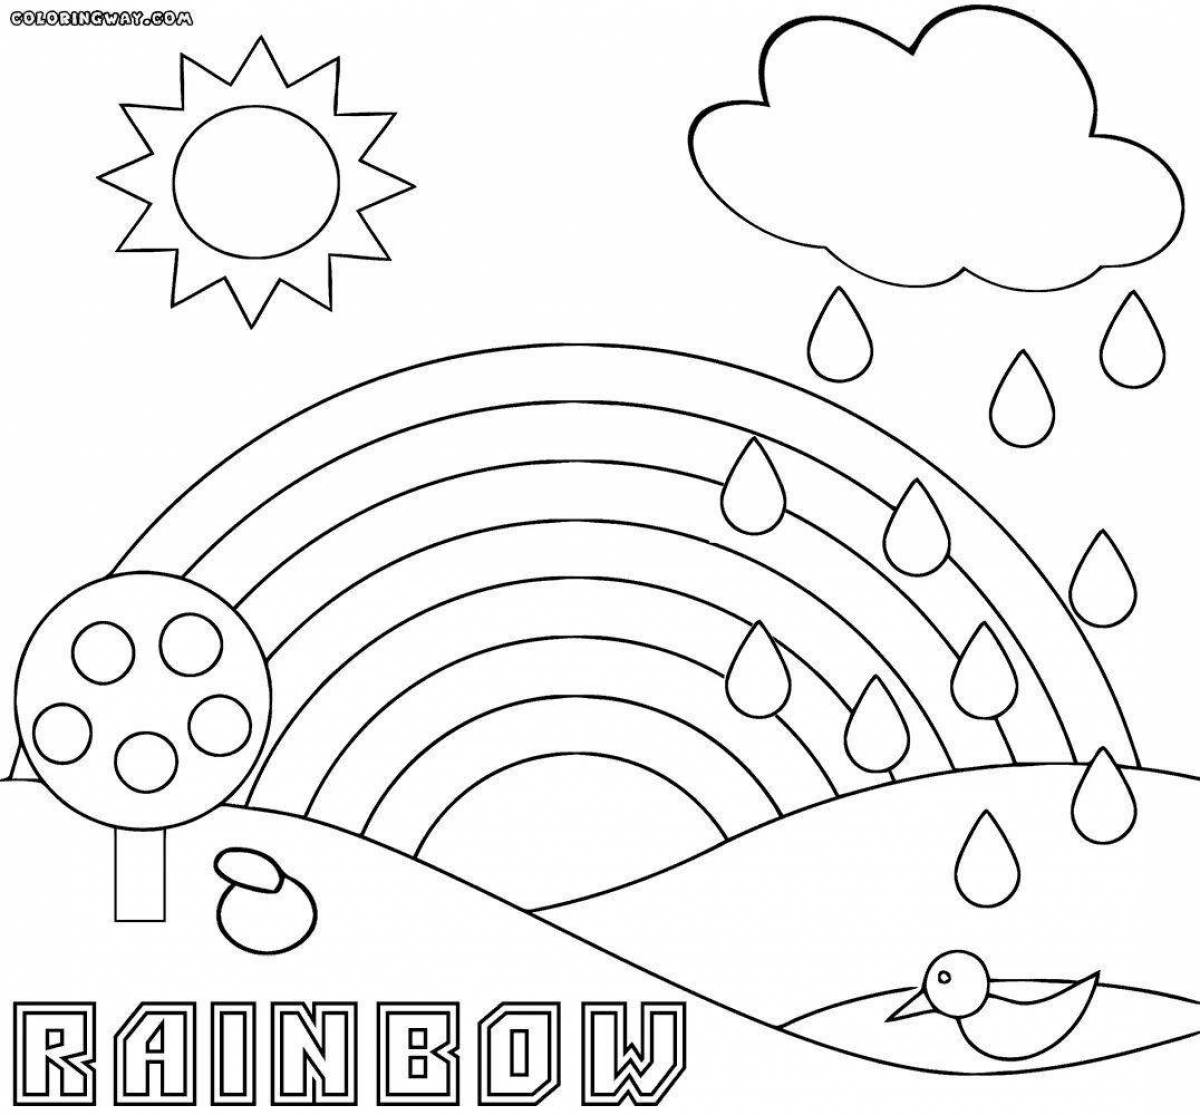 Glowing rainbow coloring book for kids